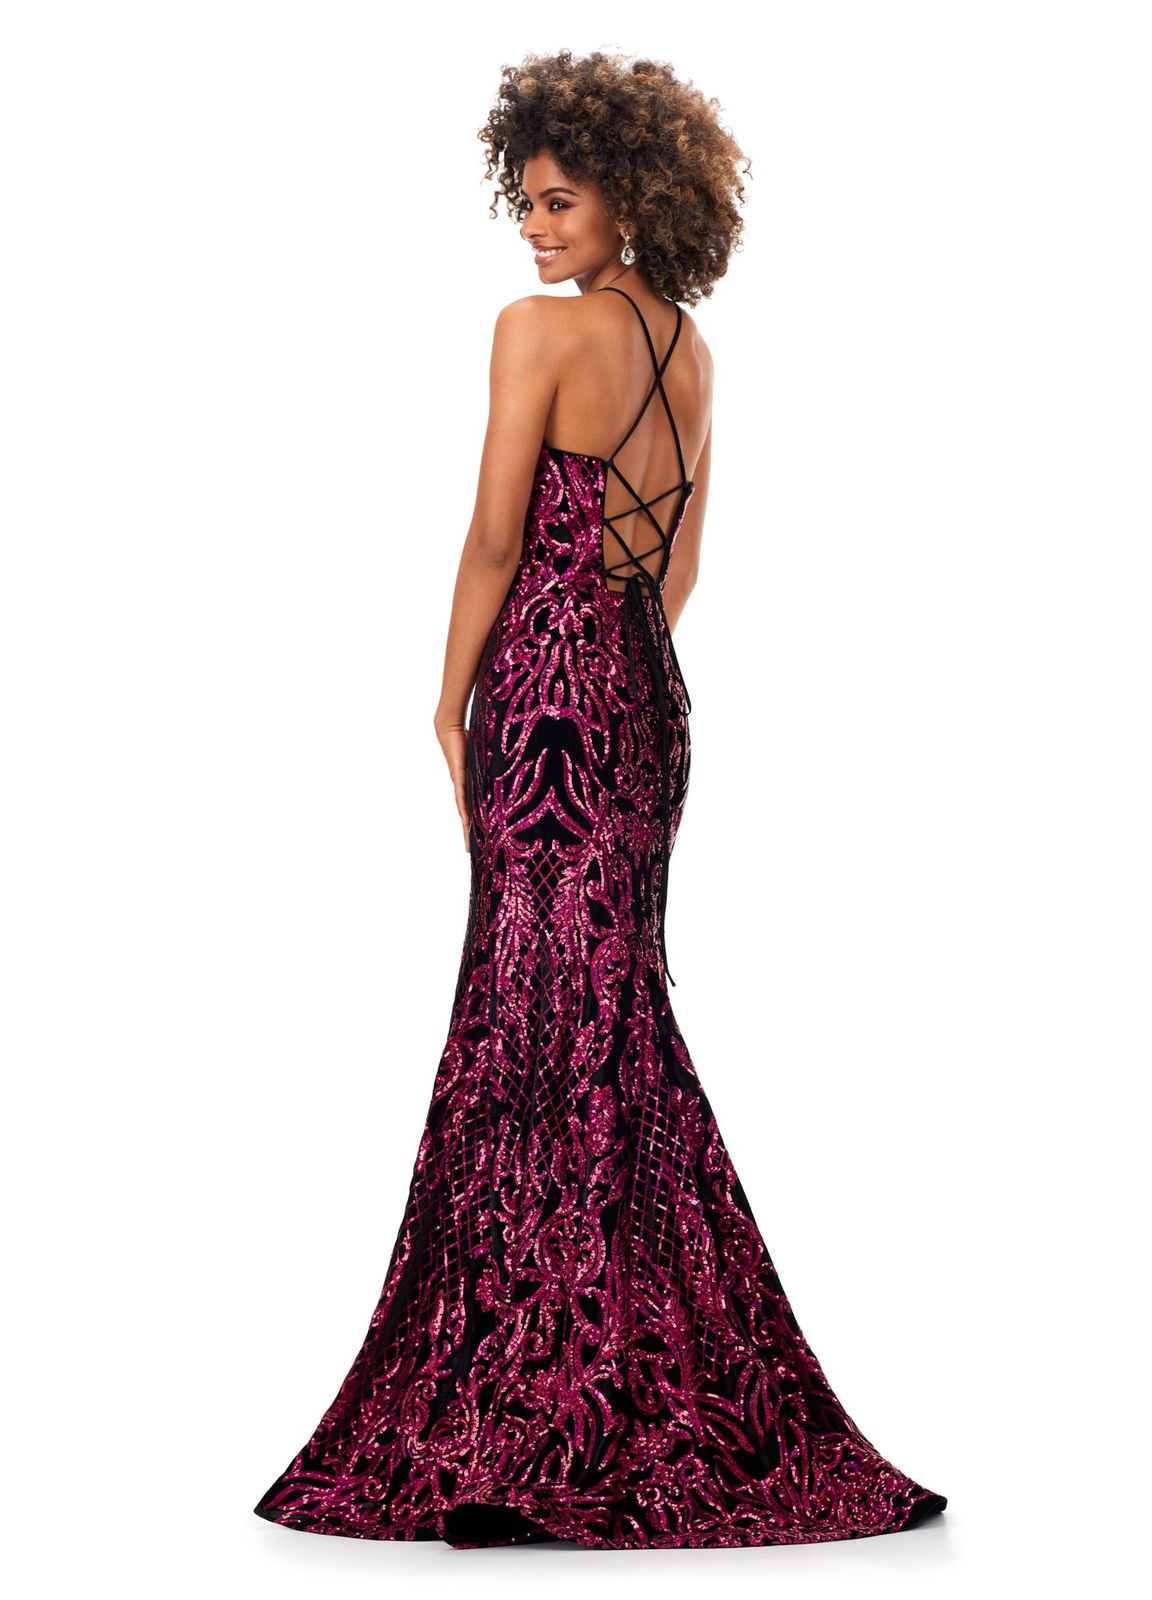 Ashley Lauren 11331 Make an entrance in this velvet sequin gown. The spaghetti straps are sure to provide the perfect fit. The sequin applique is perfectly placed throughout the gown to compliment your curves. The look is complete with a sweep train. Spaghetti Straps Lace Up Back Sweep Train Velvet Sequin COLORS: Blue, Fuchsia/Black, Turquoise/Royal